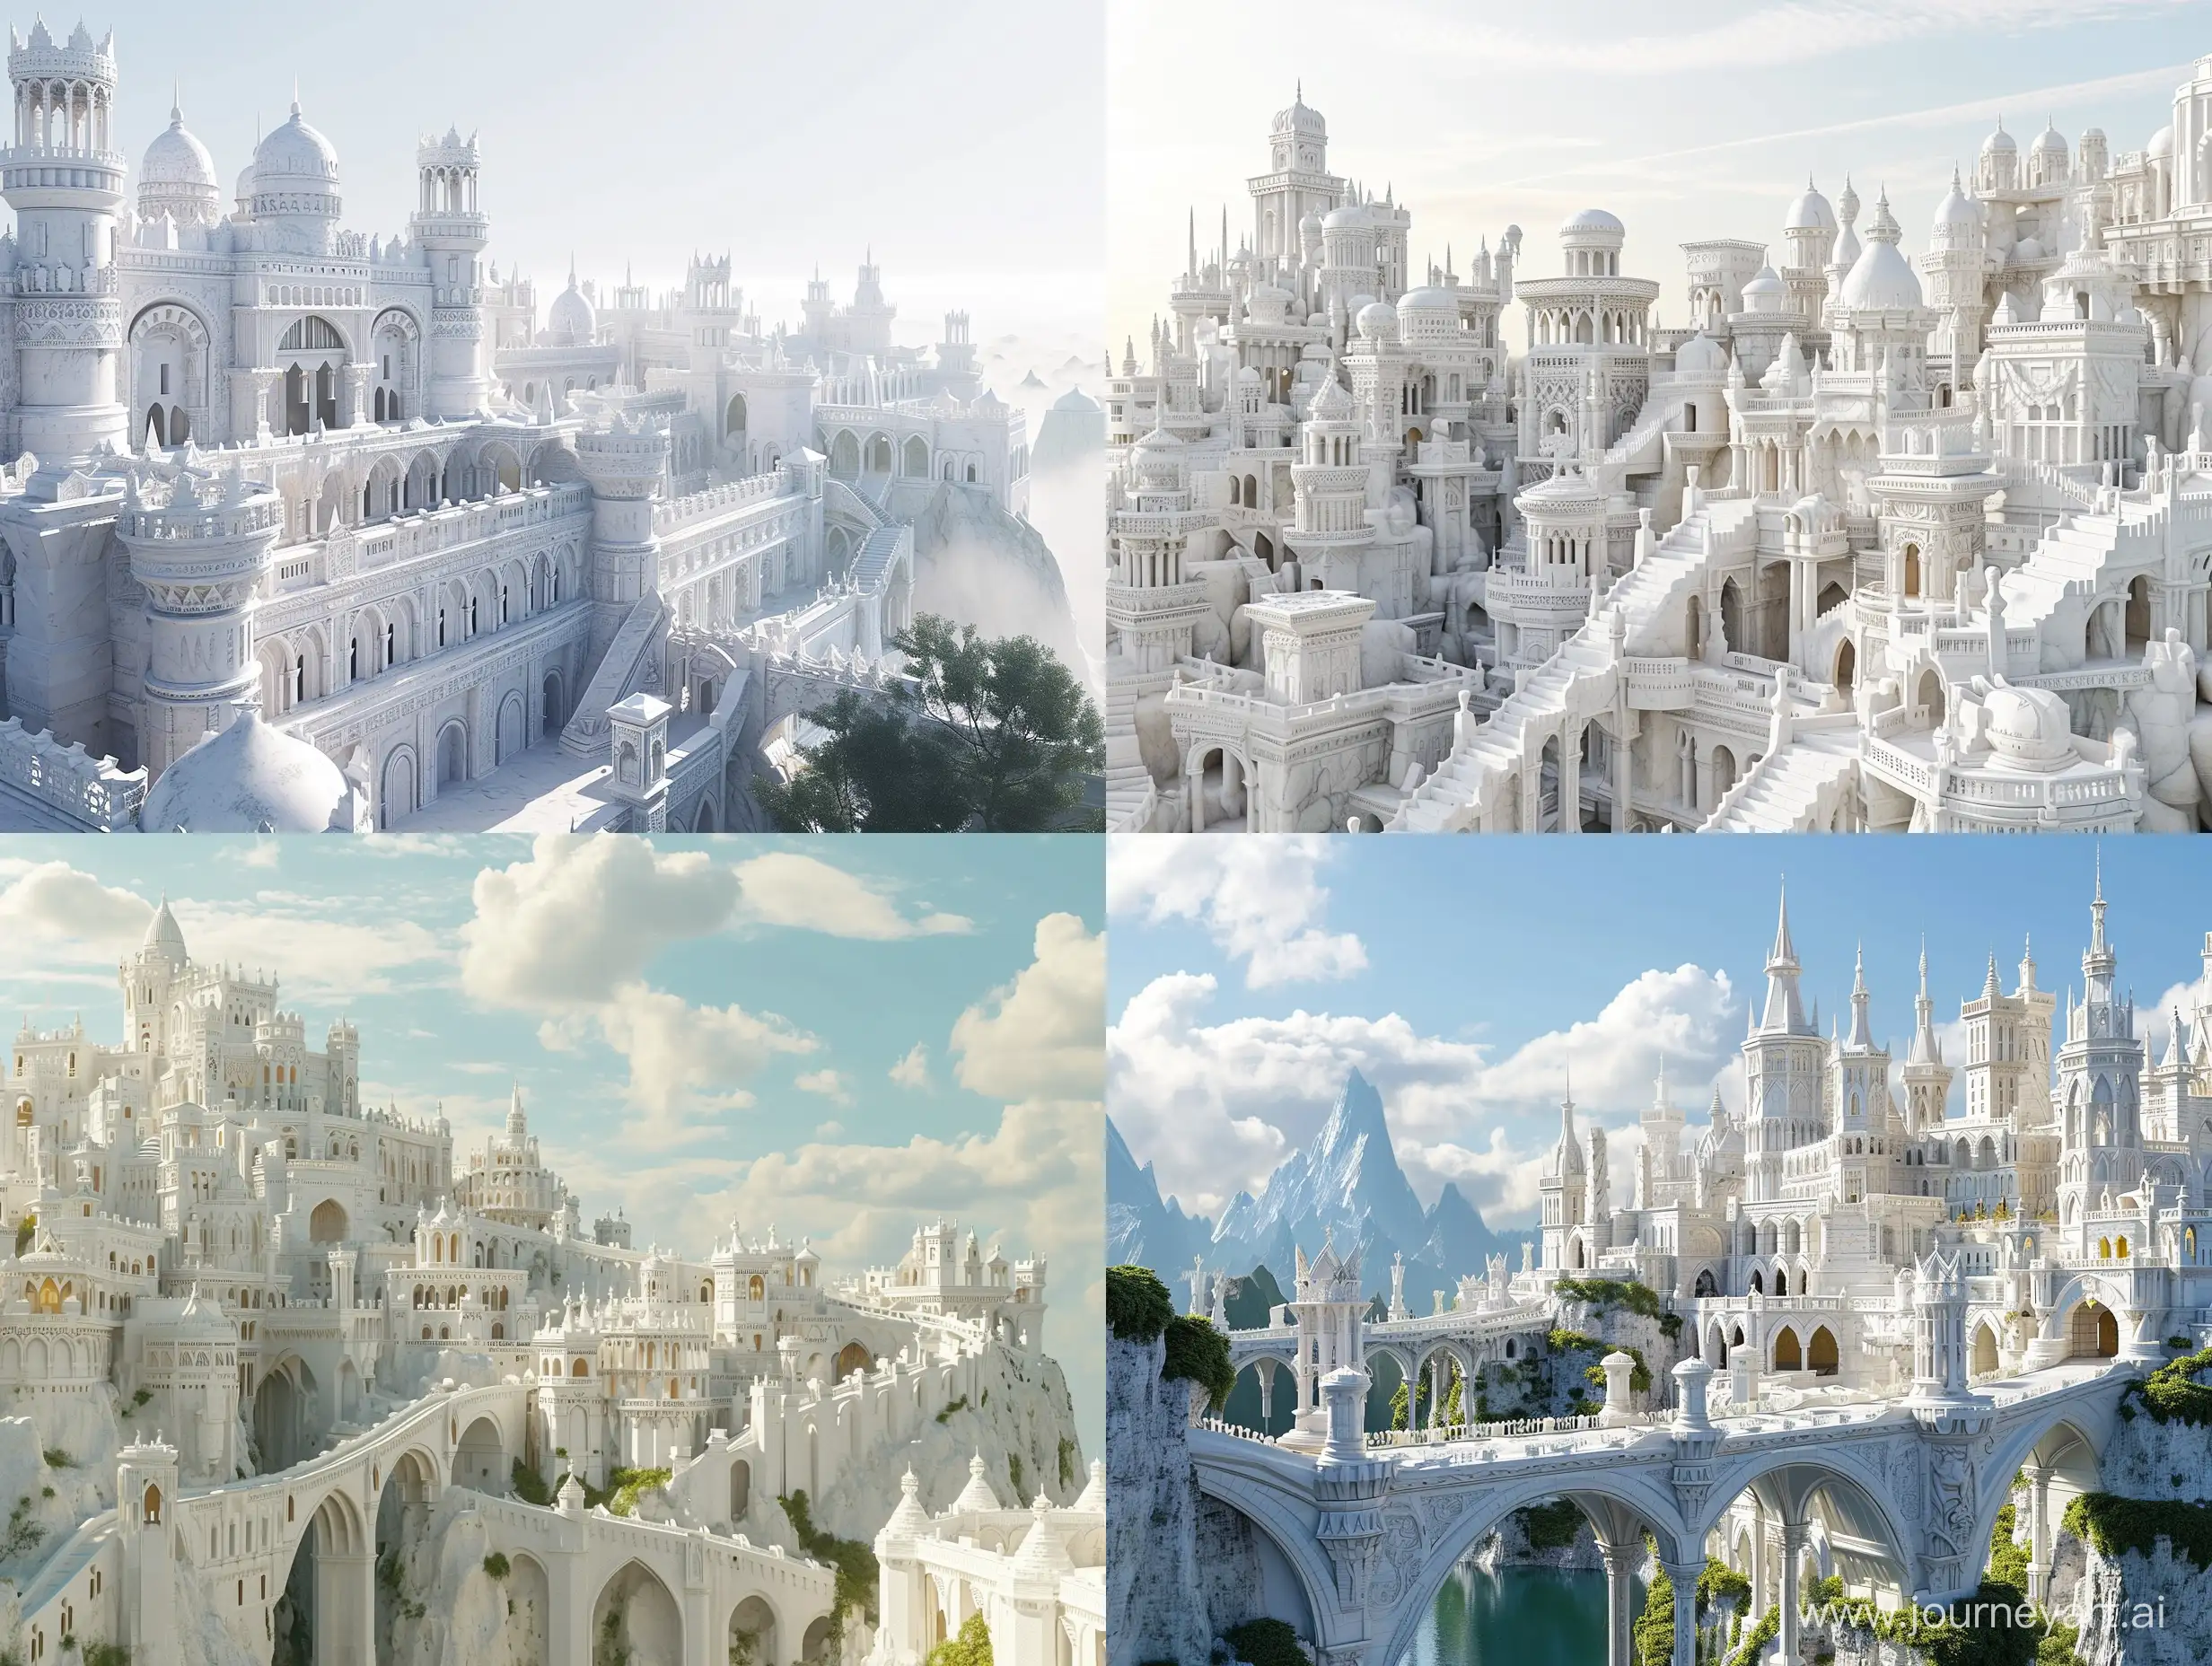 European fantasy city built with white marble. View from afar